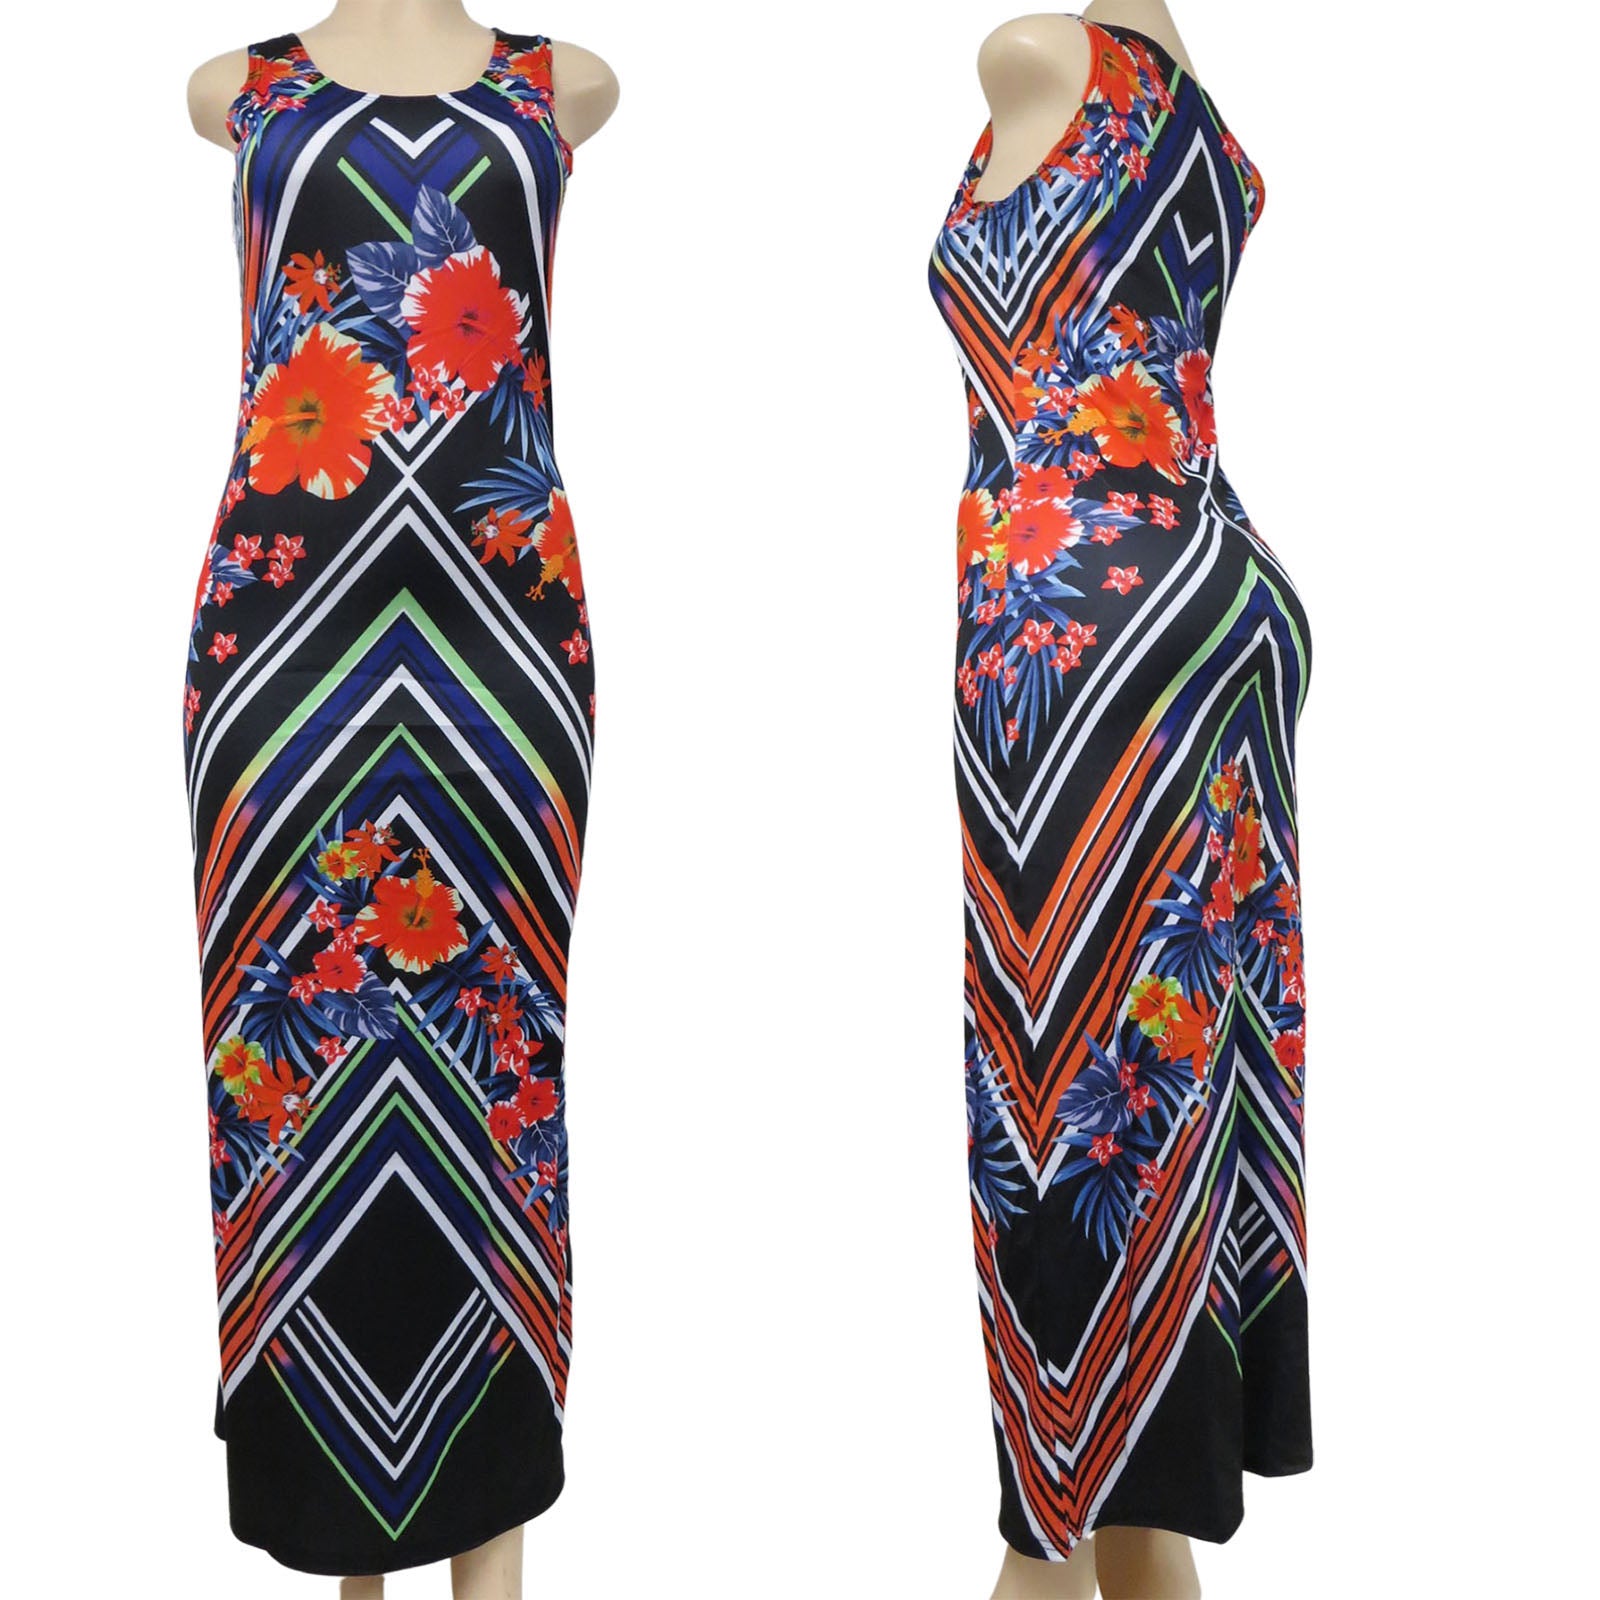 long sleeveless wholesale dress for women in an abstract floral pattern